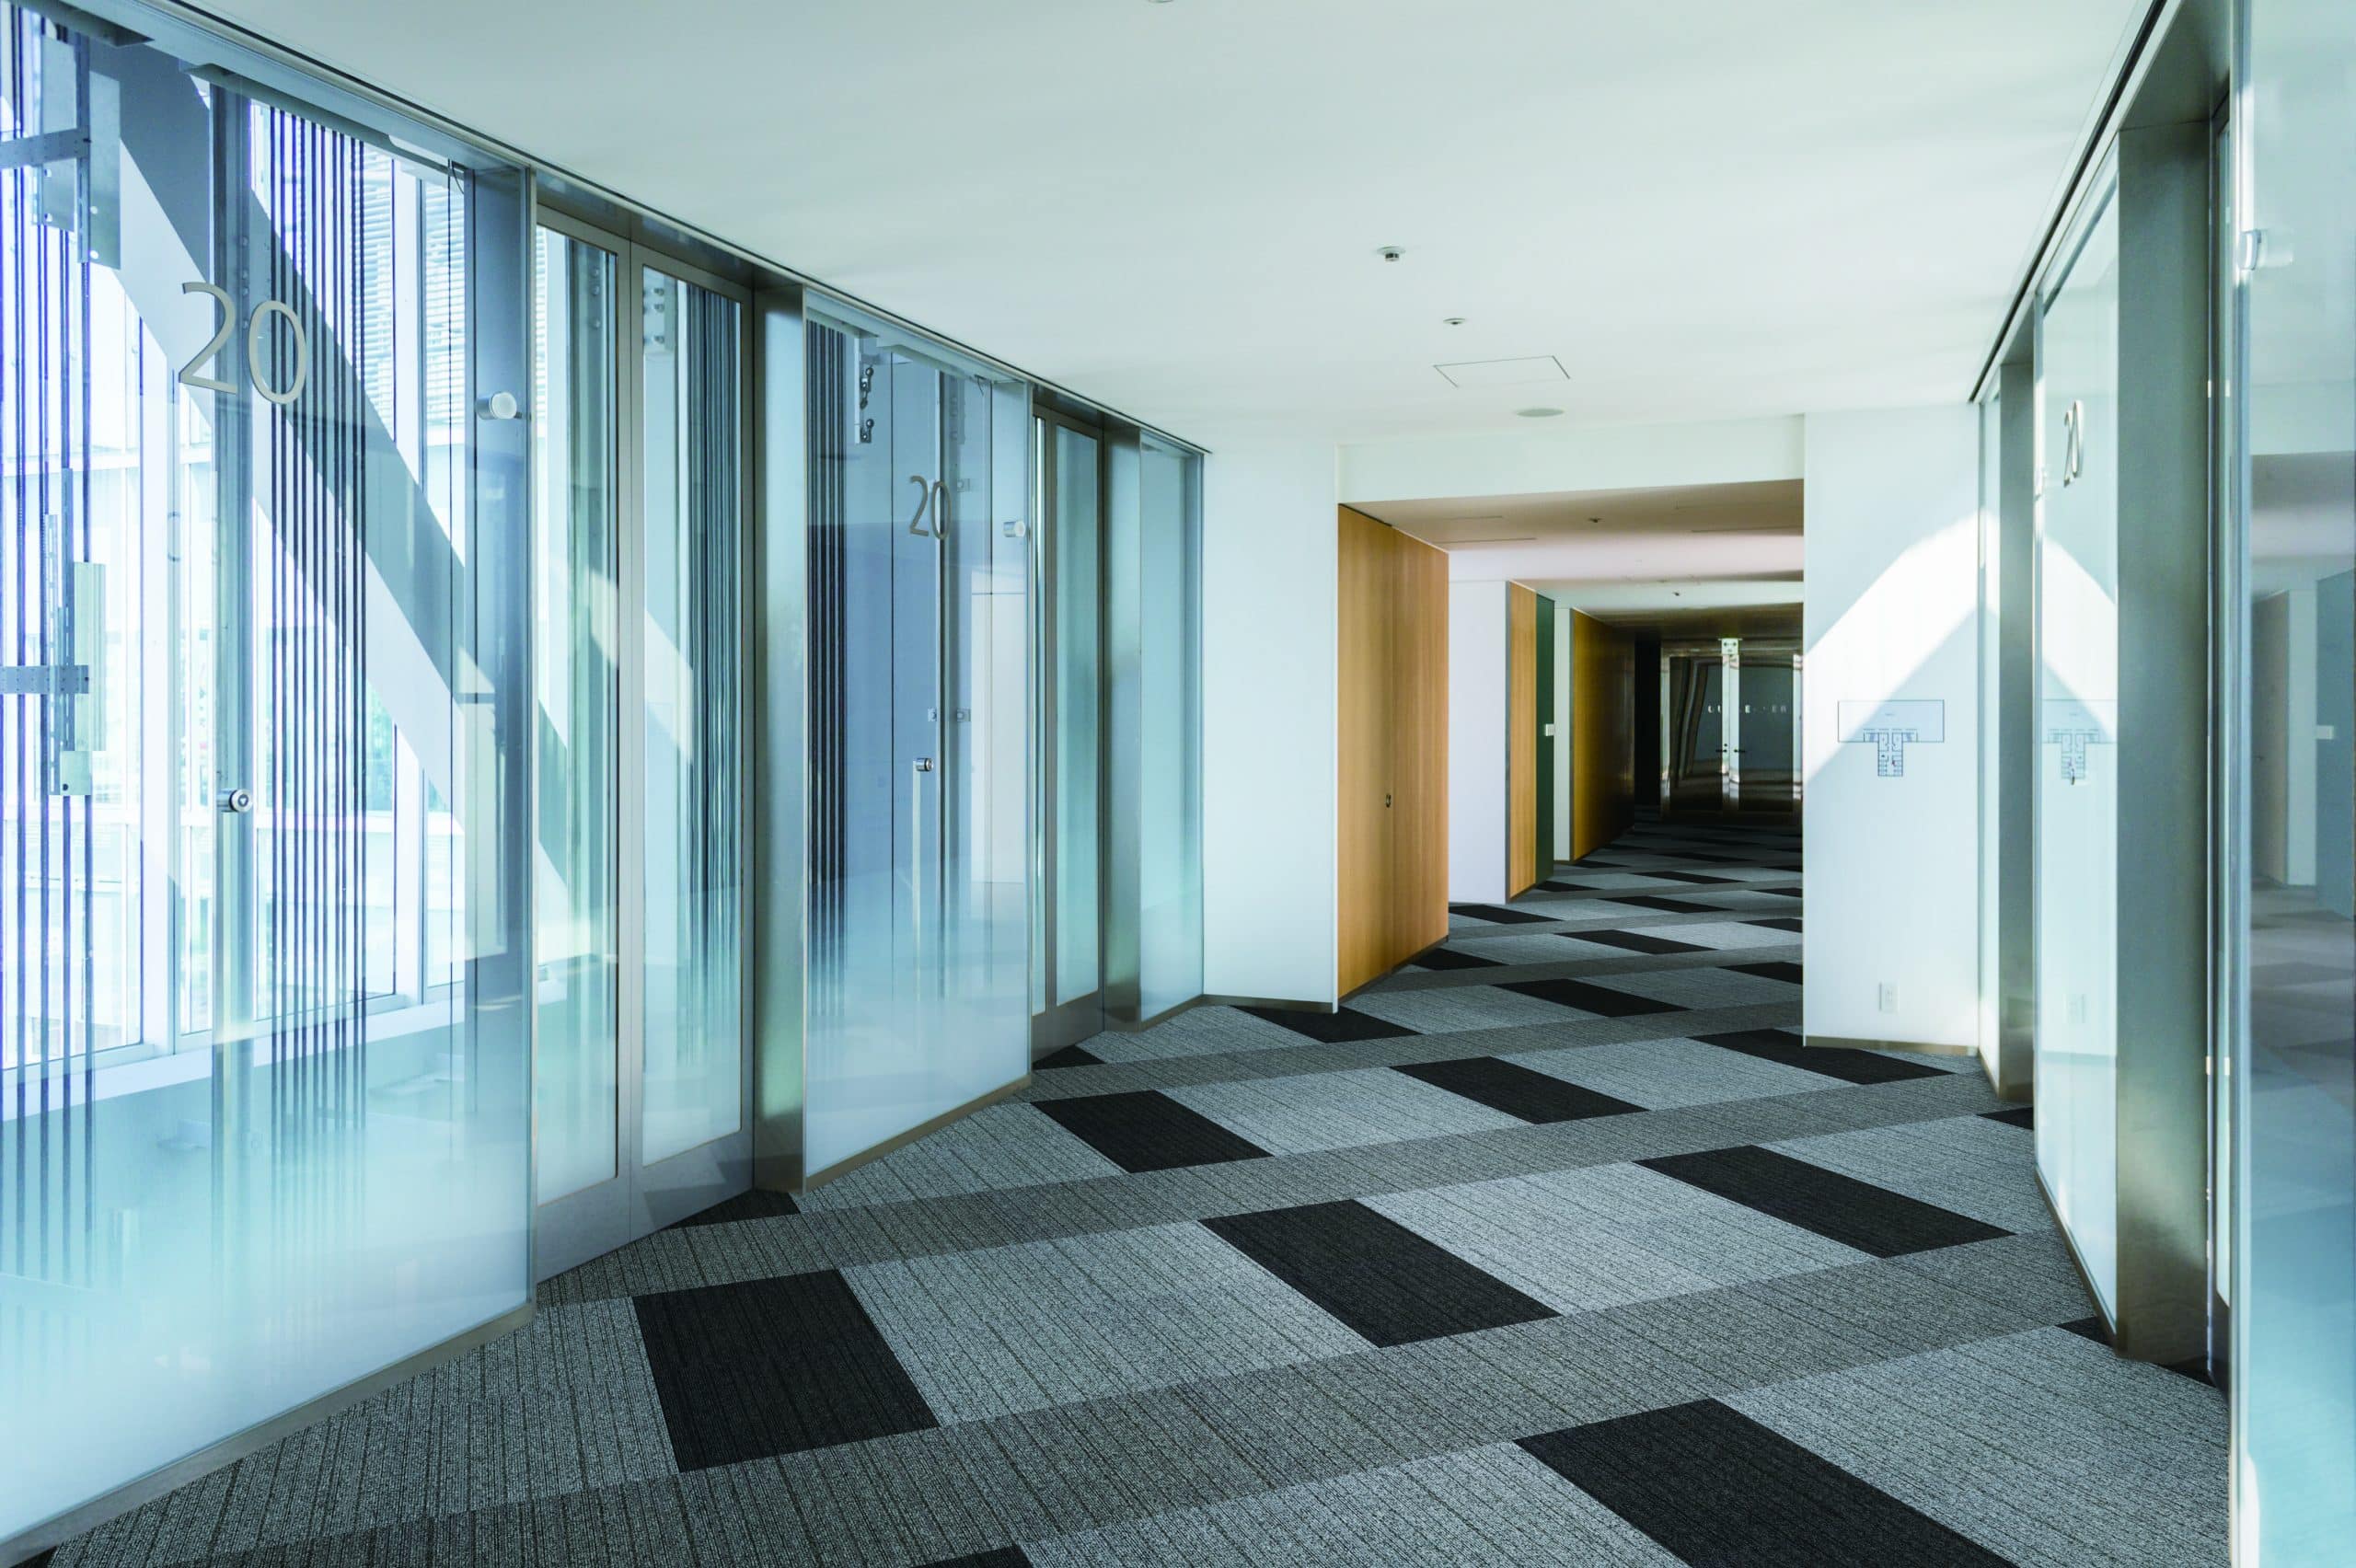 image presents Kachi Carpet Tiles supply and installation company in Sydney